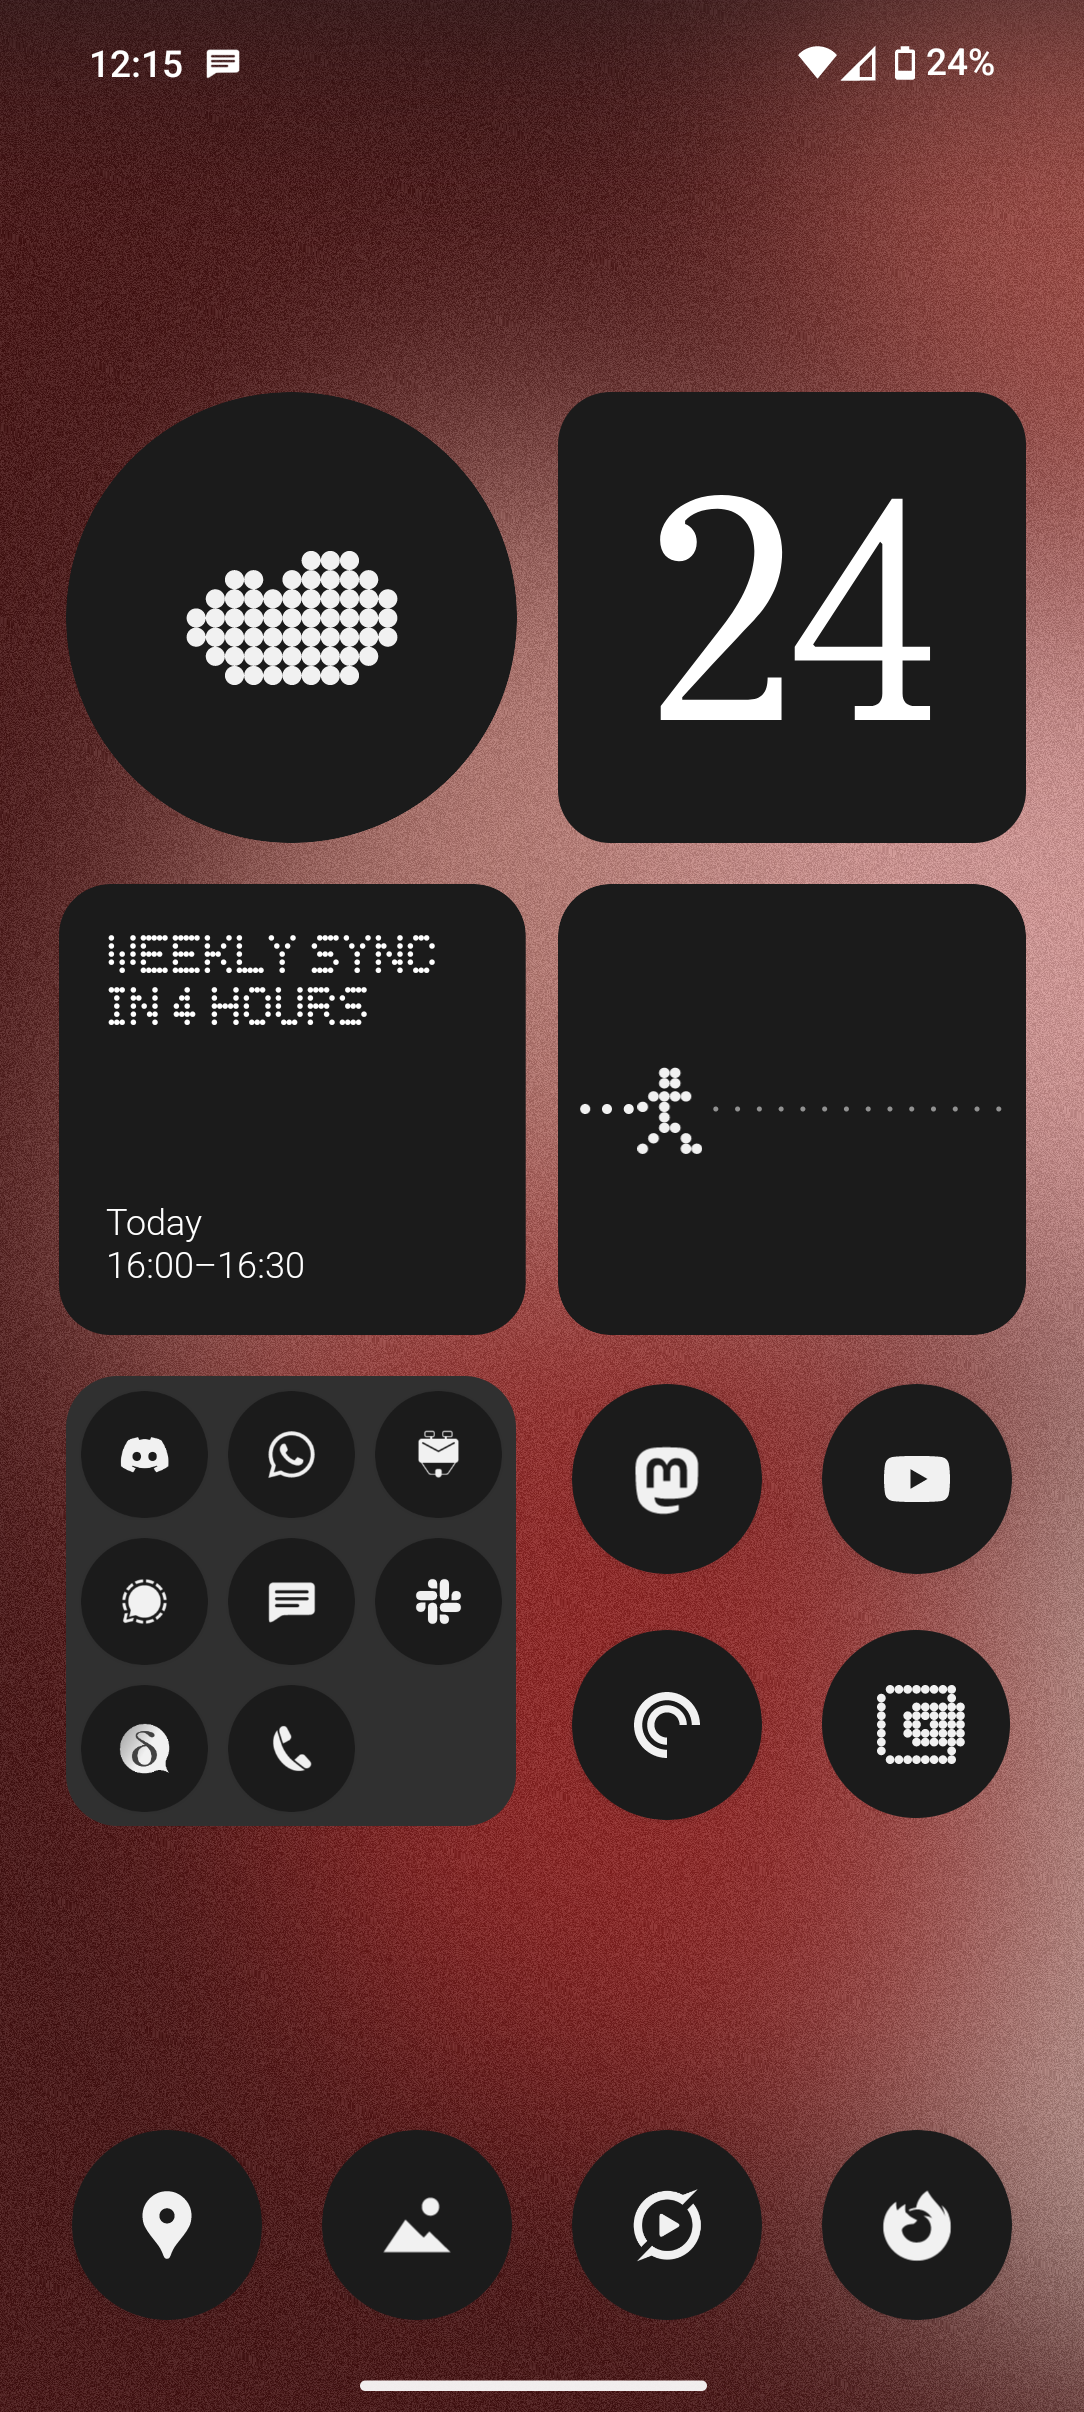 A Nothing Phone home screen with weather, date, next event and pedometer widgets